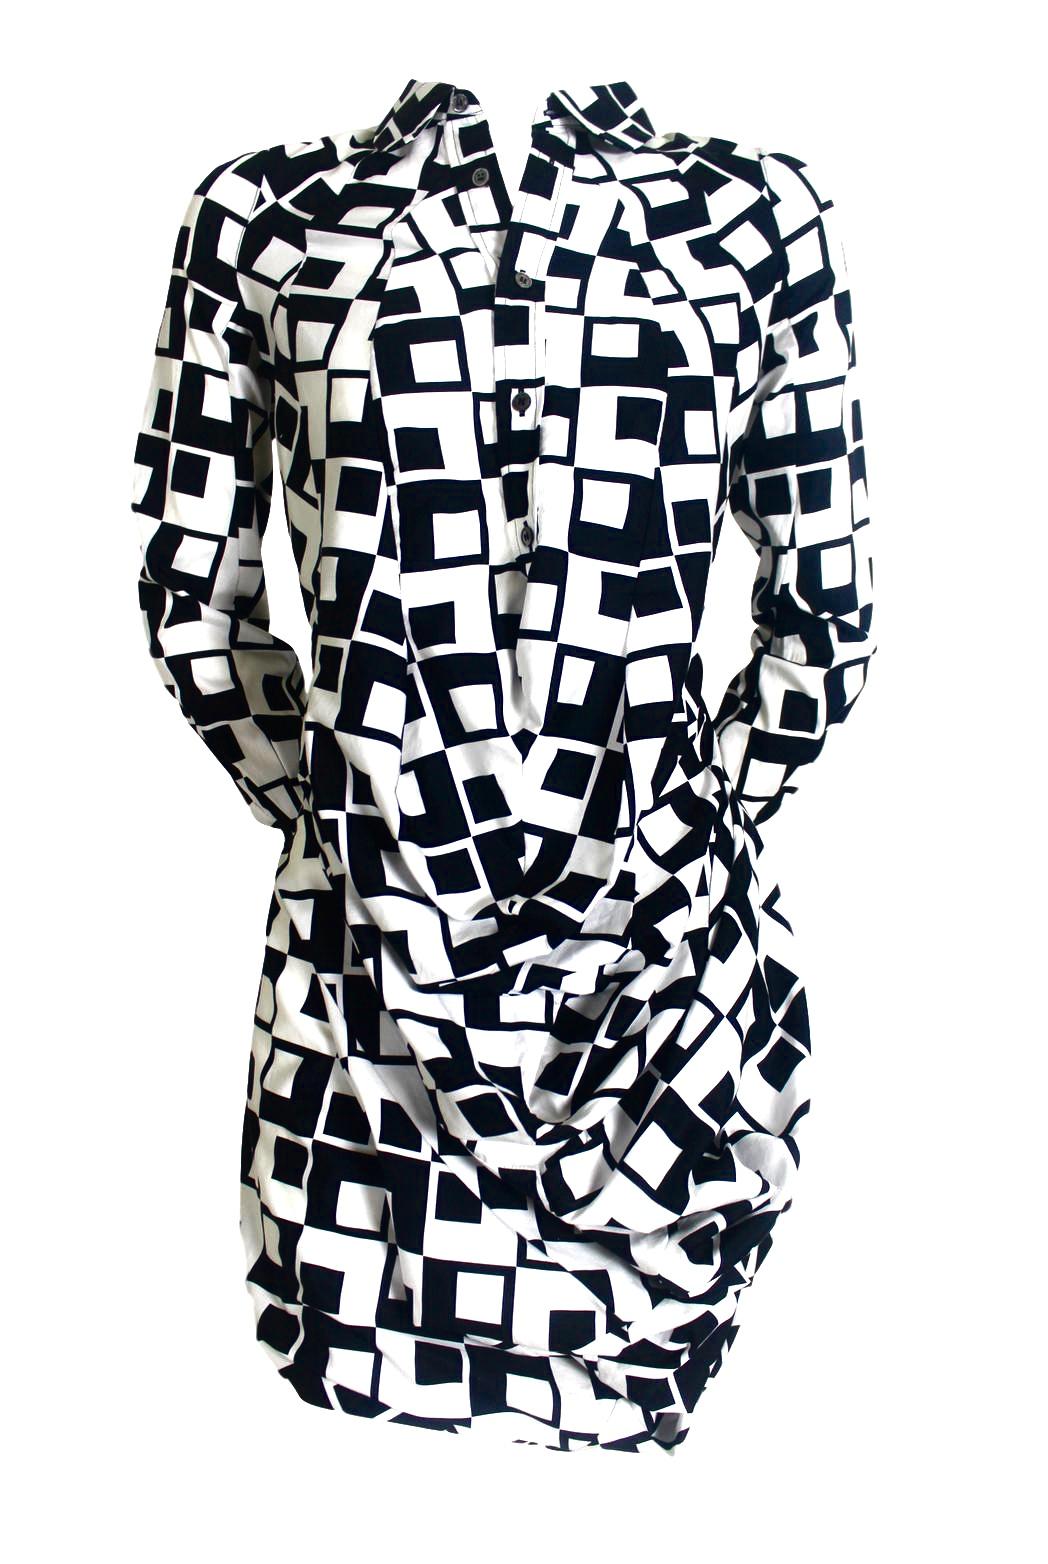 Comme des Garcons Junya Watanabe Geometric Dress AD 2009 In Excellent Condition For Sale In Bath, GB